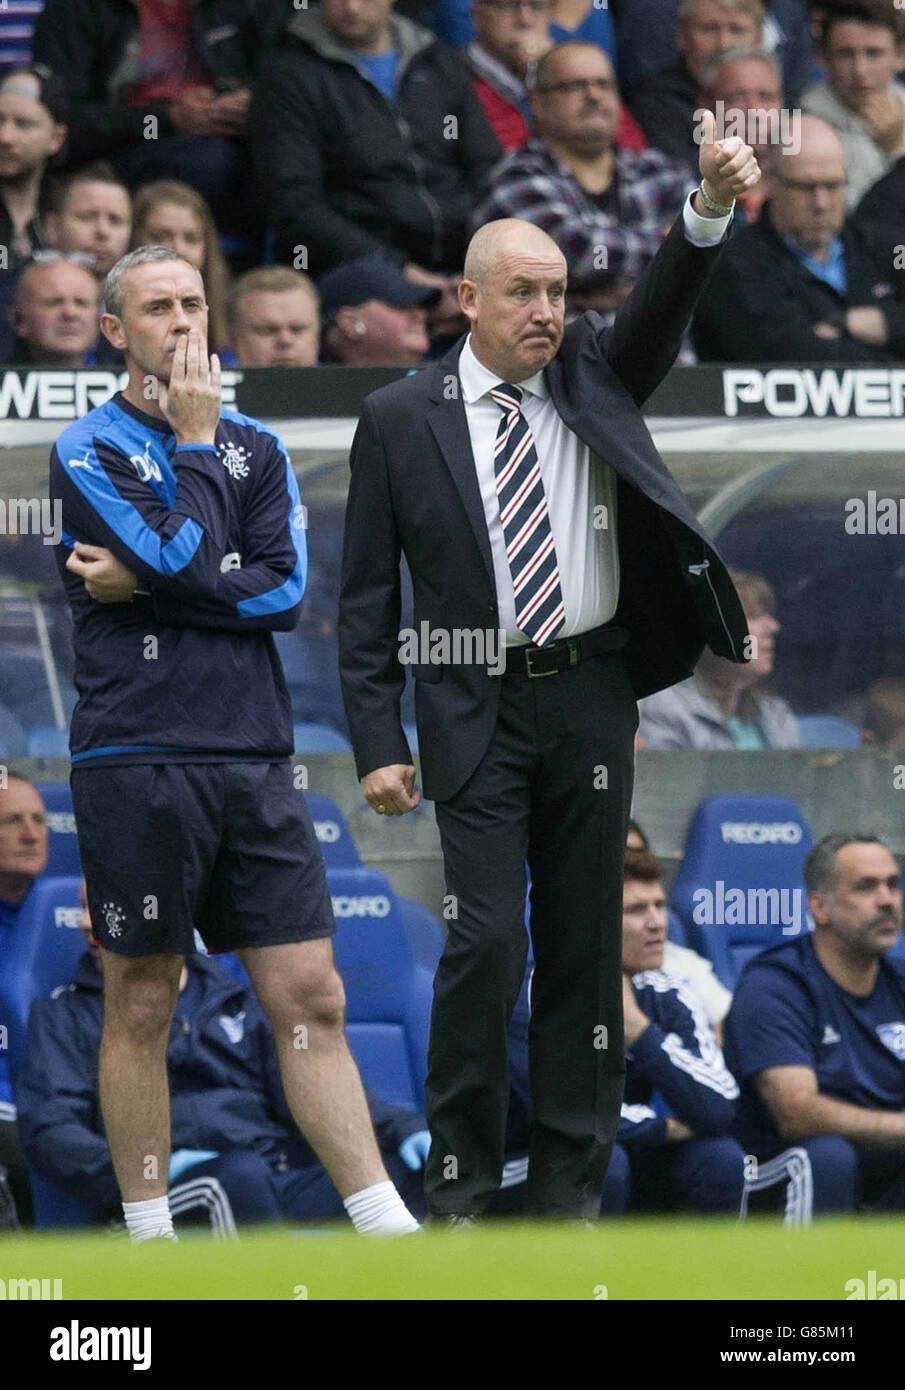 Rangers manager Mark Warburton during the Scottish Communities League Cup match at Ibrox Stadium, Glasgow. Stock Photo